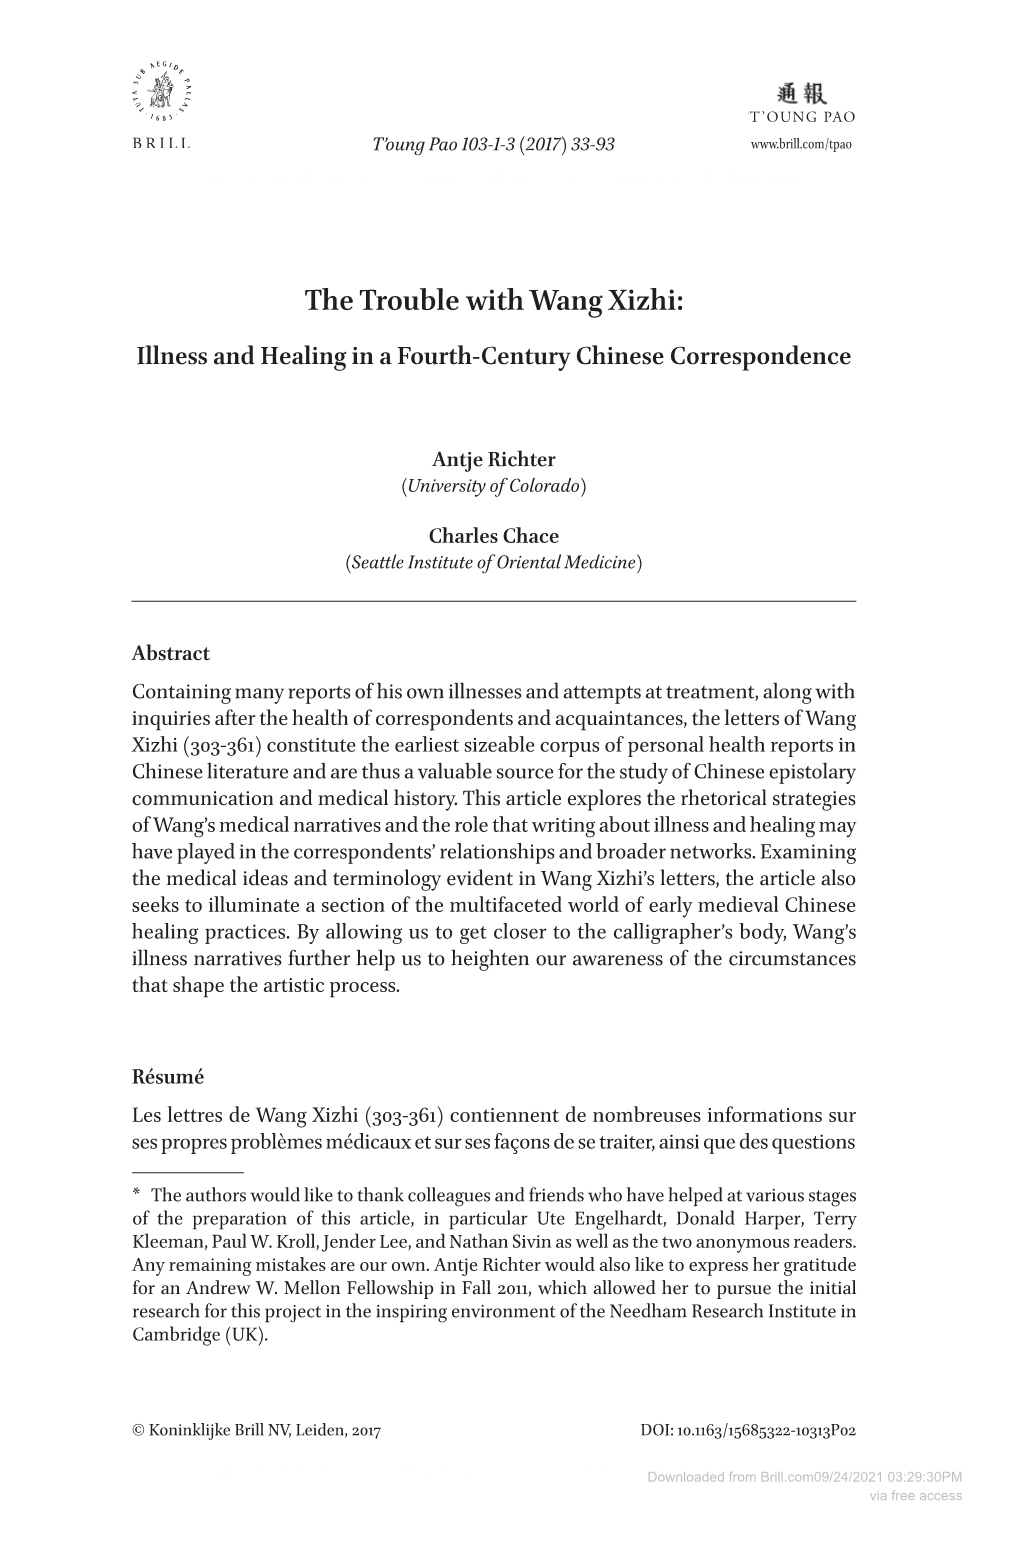 The Trouble with Wang Xizhi: Illness and Healing in a Fourth-Century Chinese Correspondence